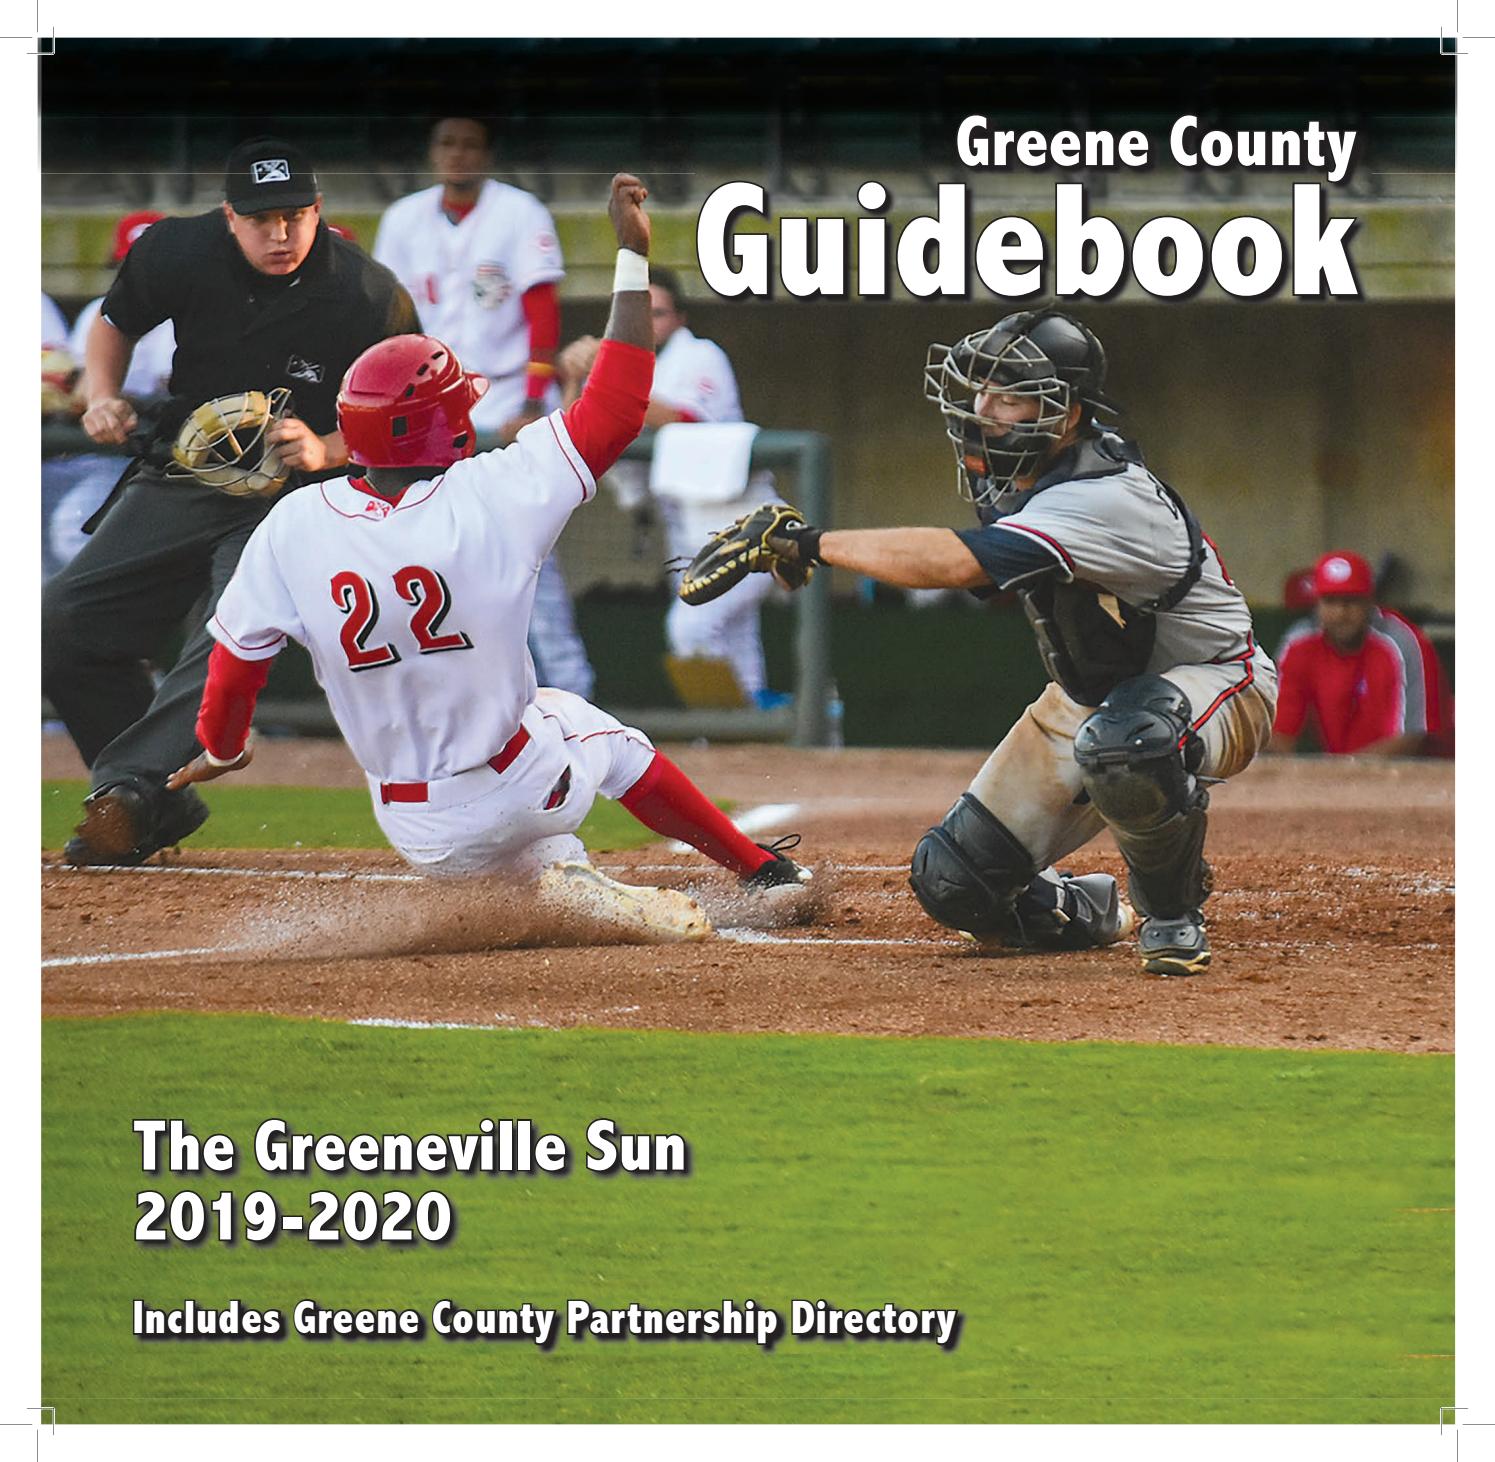 Kerns Fireplace Fresh Guidebook 2019 2020 by the Greeneville Sun issuu